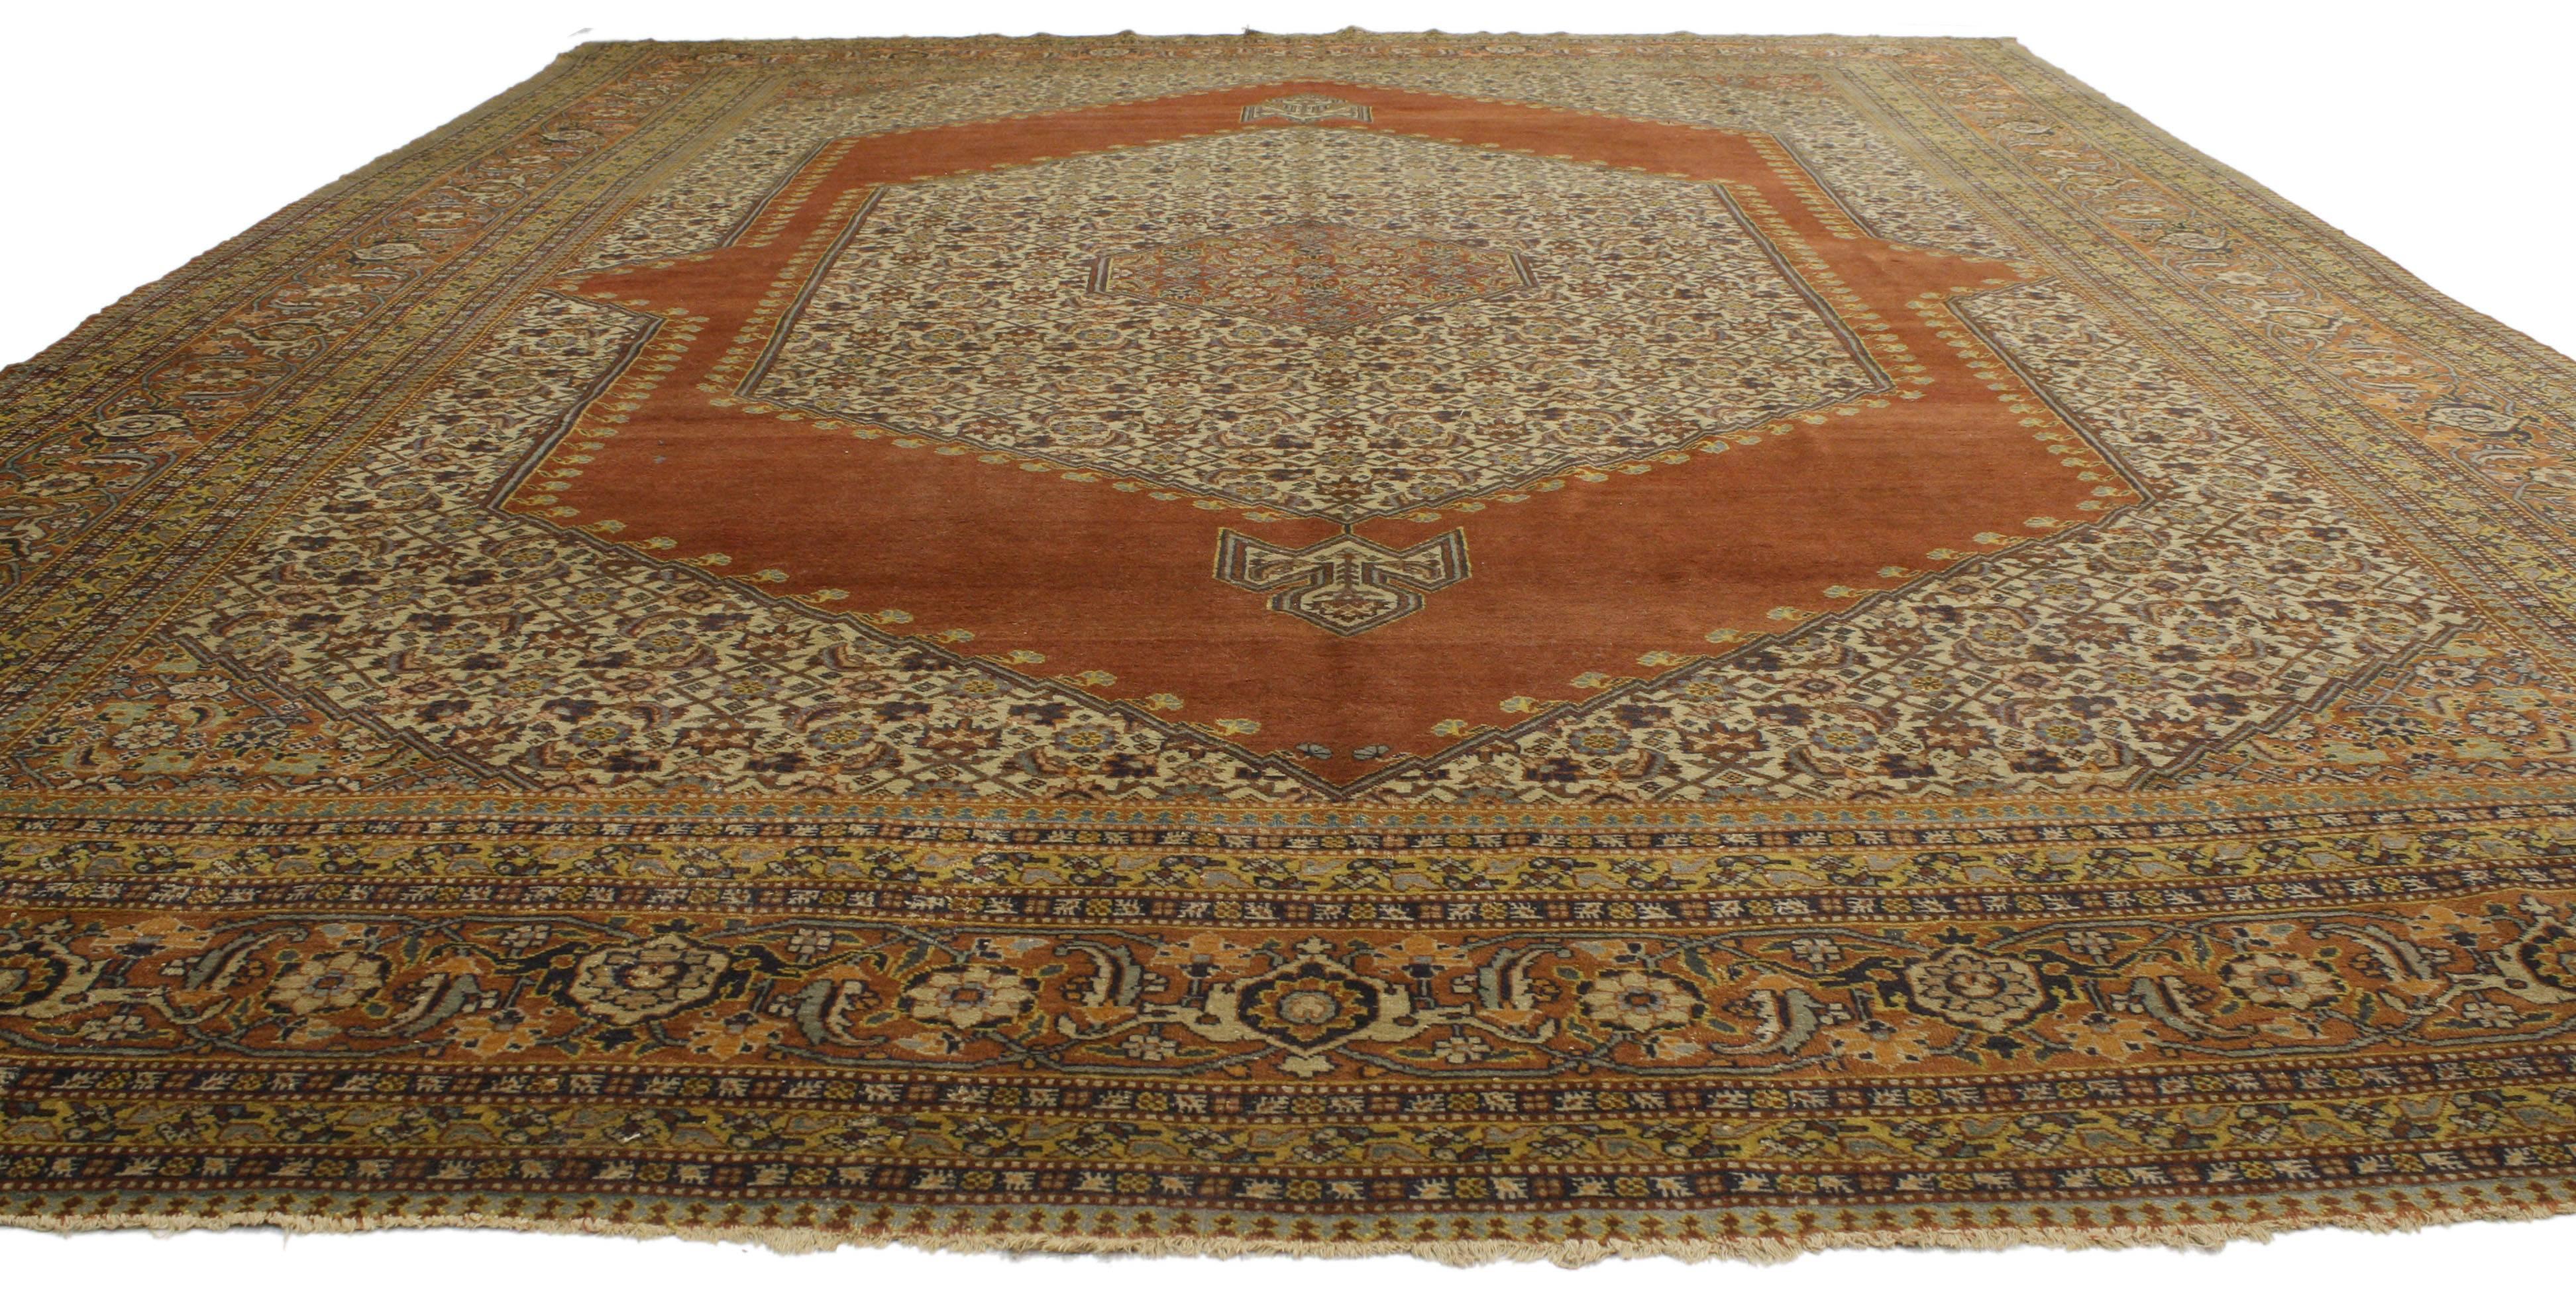 Hand-Knotted Haji Khalili Antique Persian Tabriz Rug with Modern Rustic Spanish Style